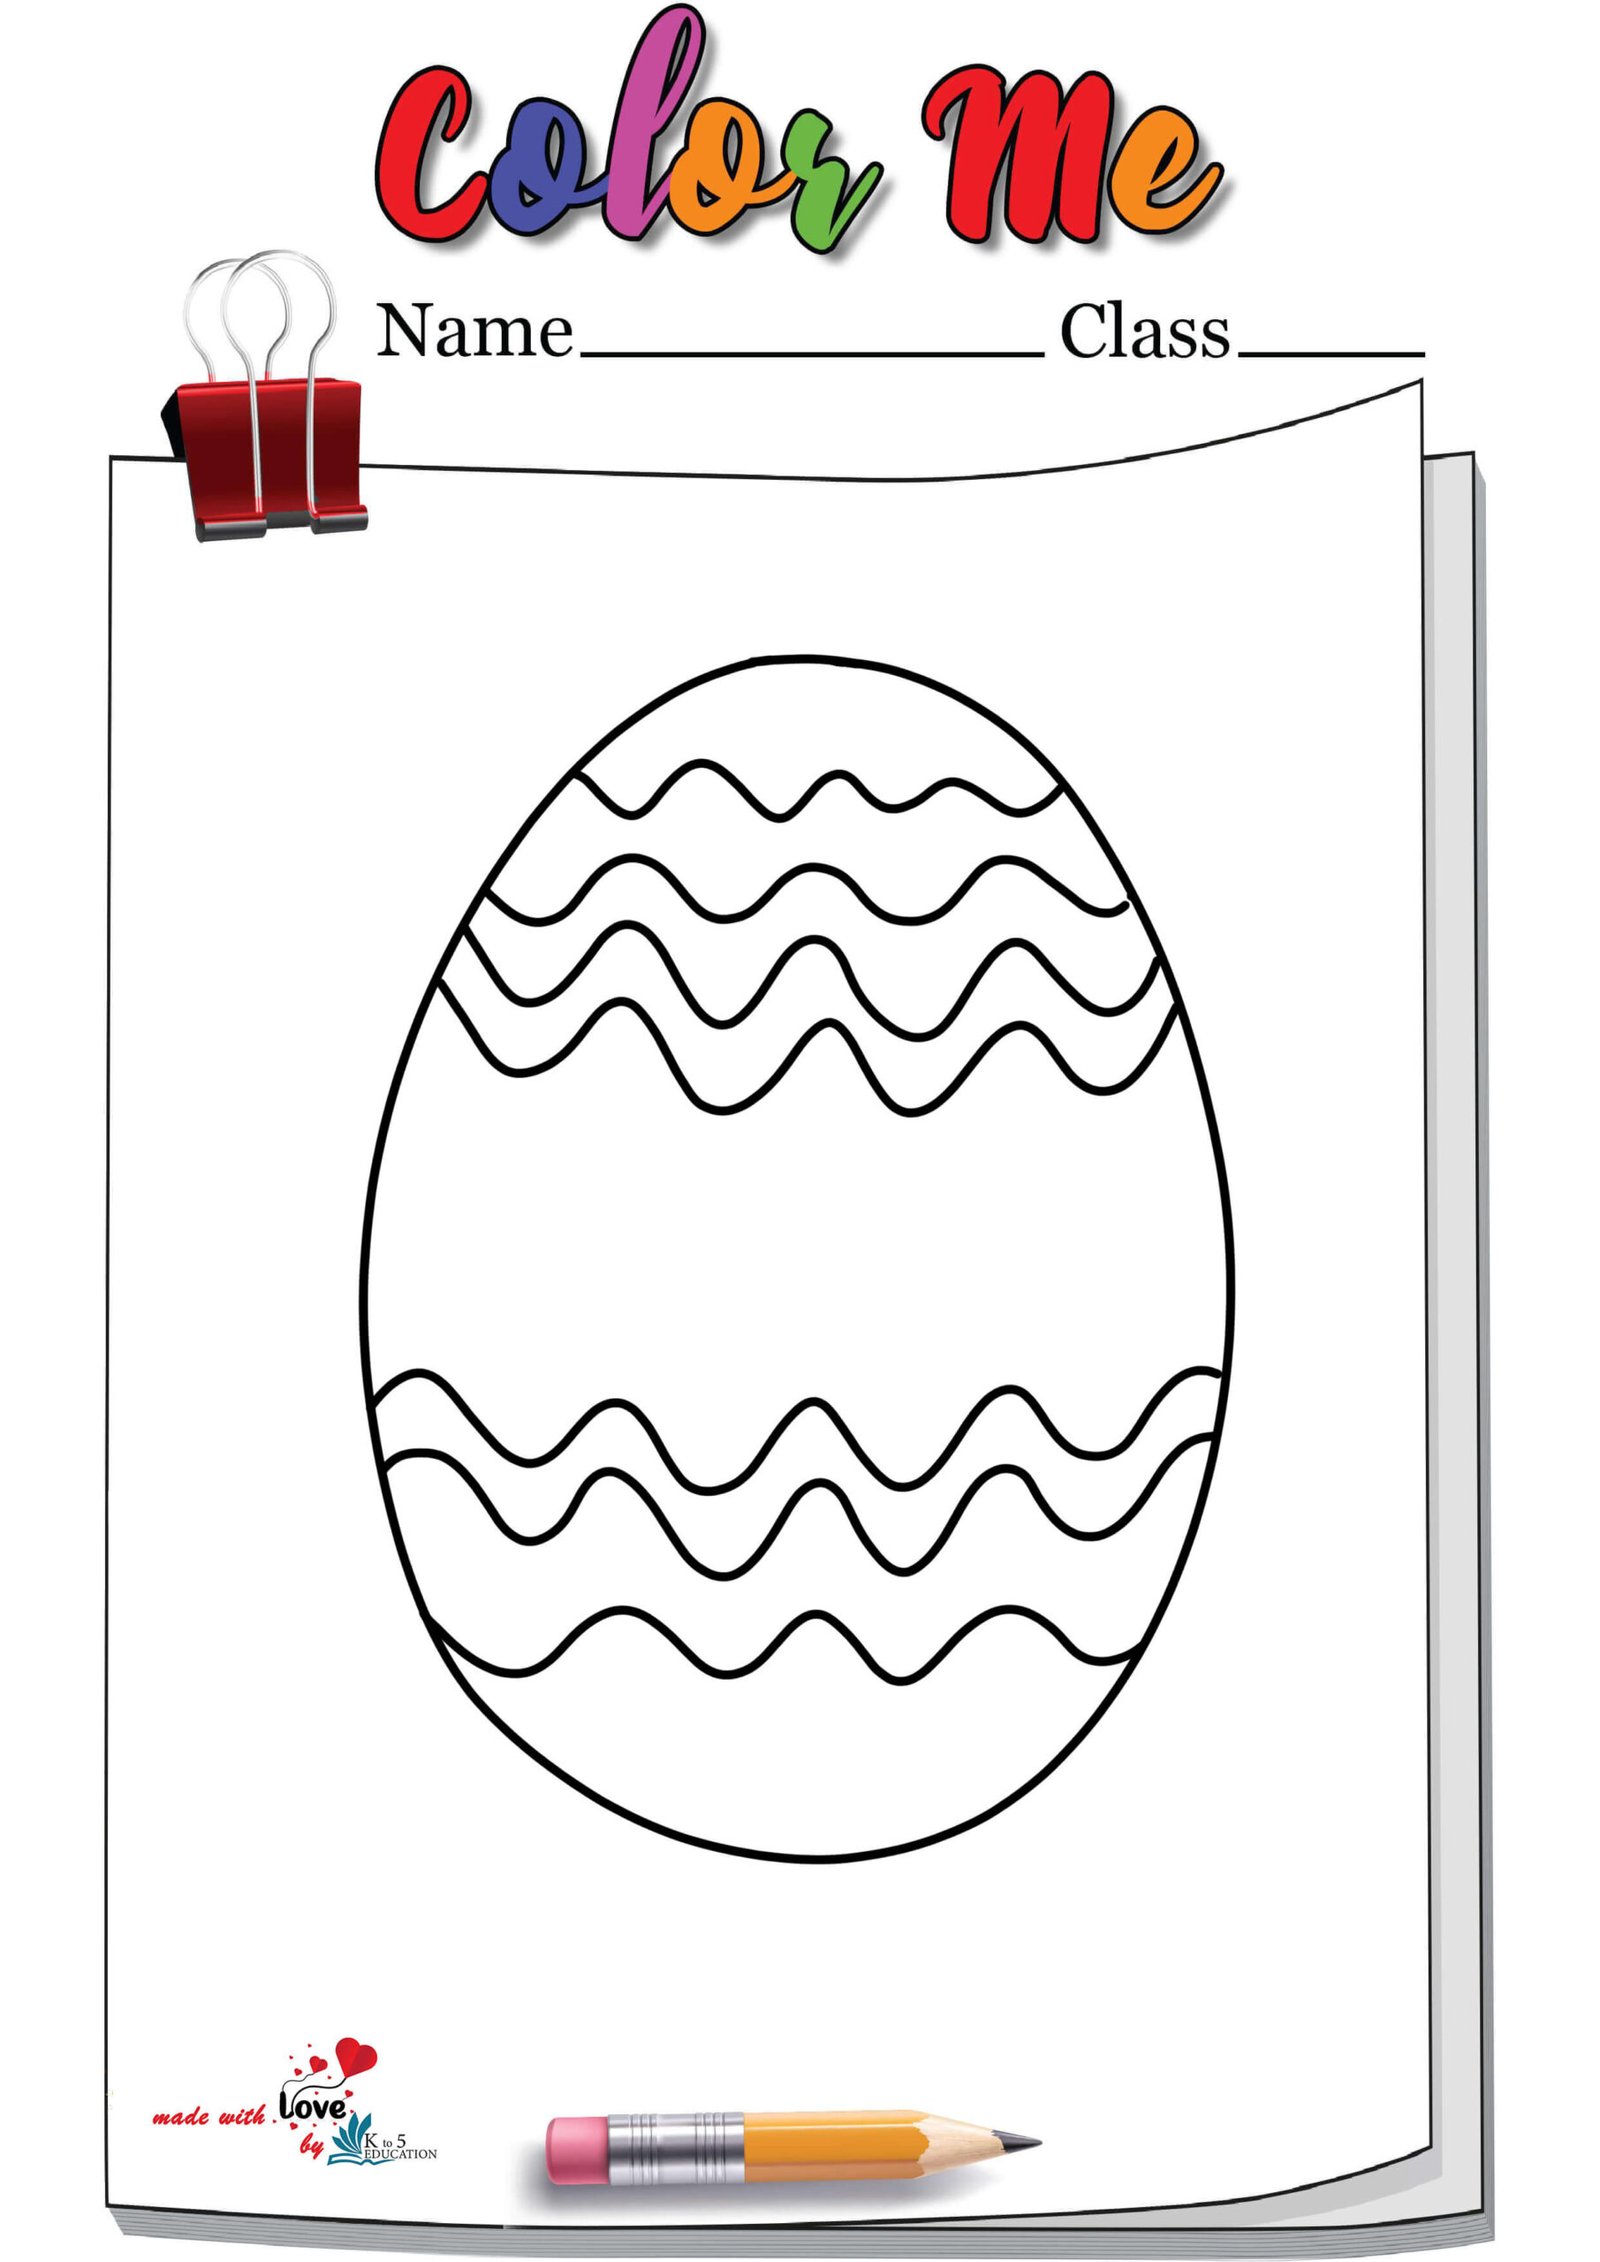 Coloring Easter Egg Hunt Coloring Page